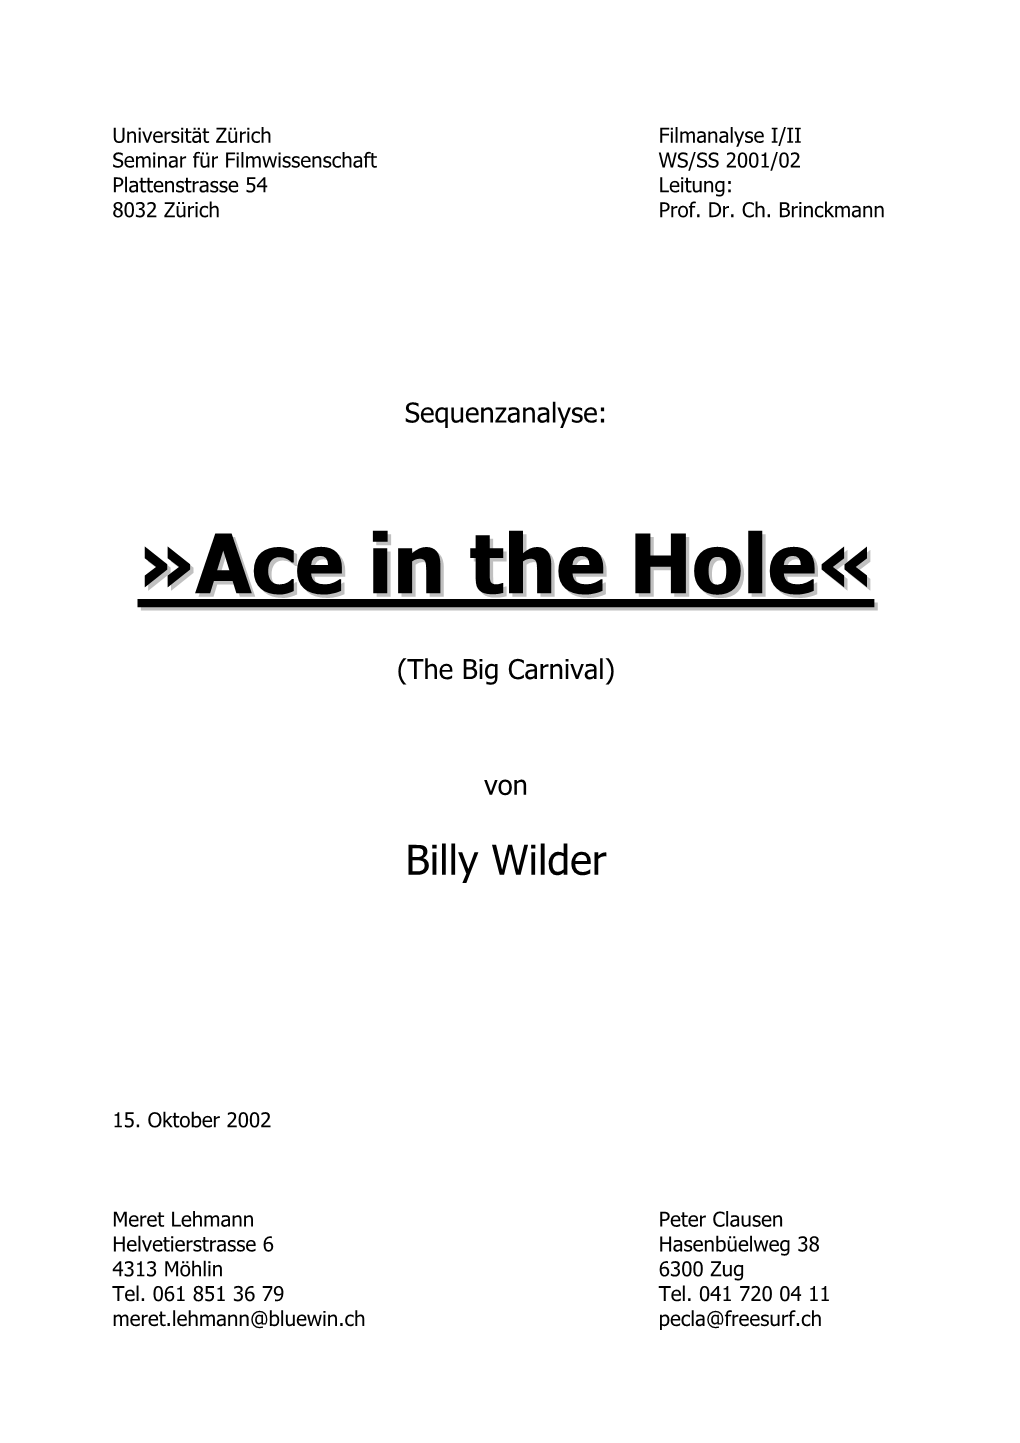 Sequenzanalyse "Ace in the Hole"